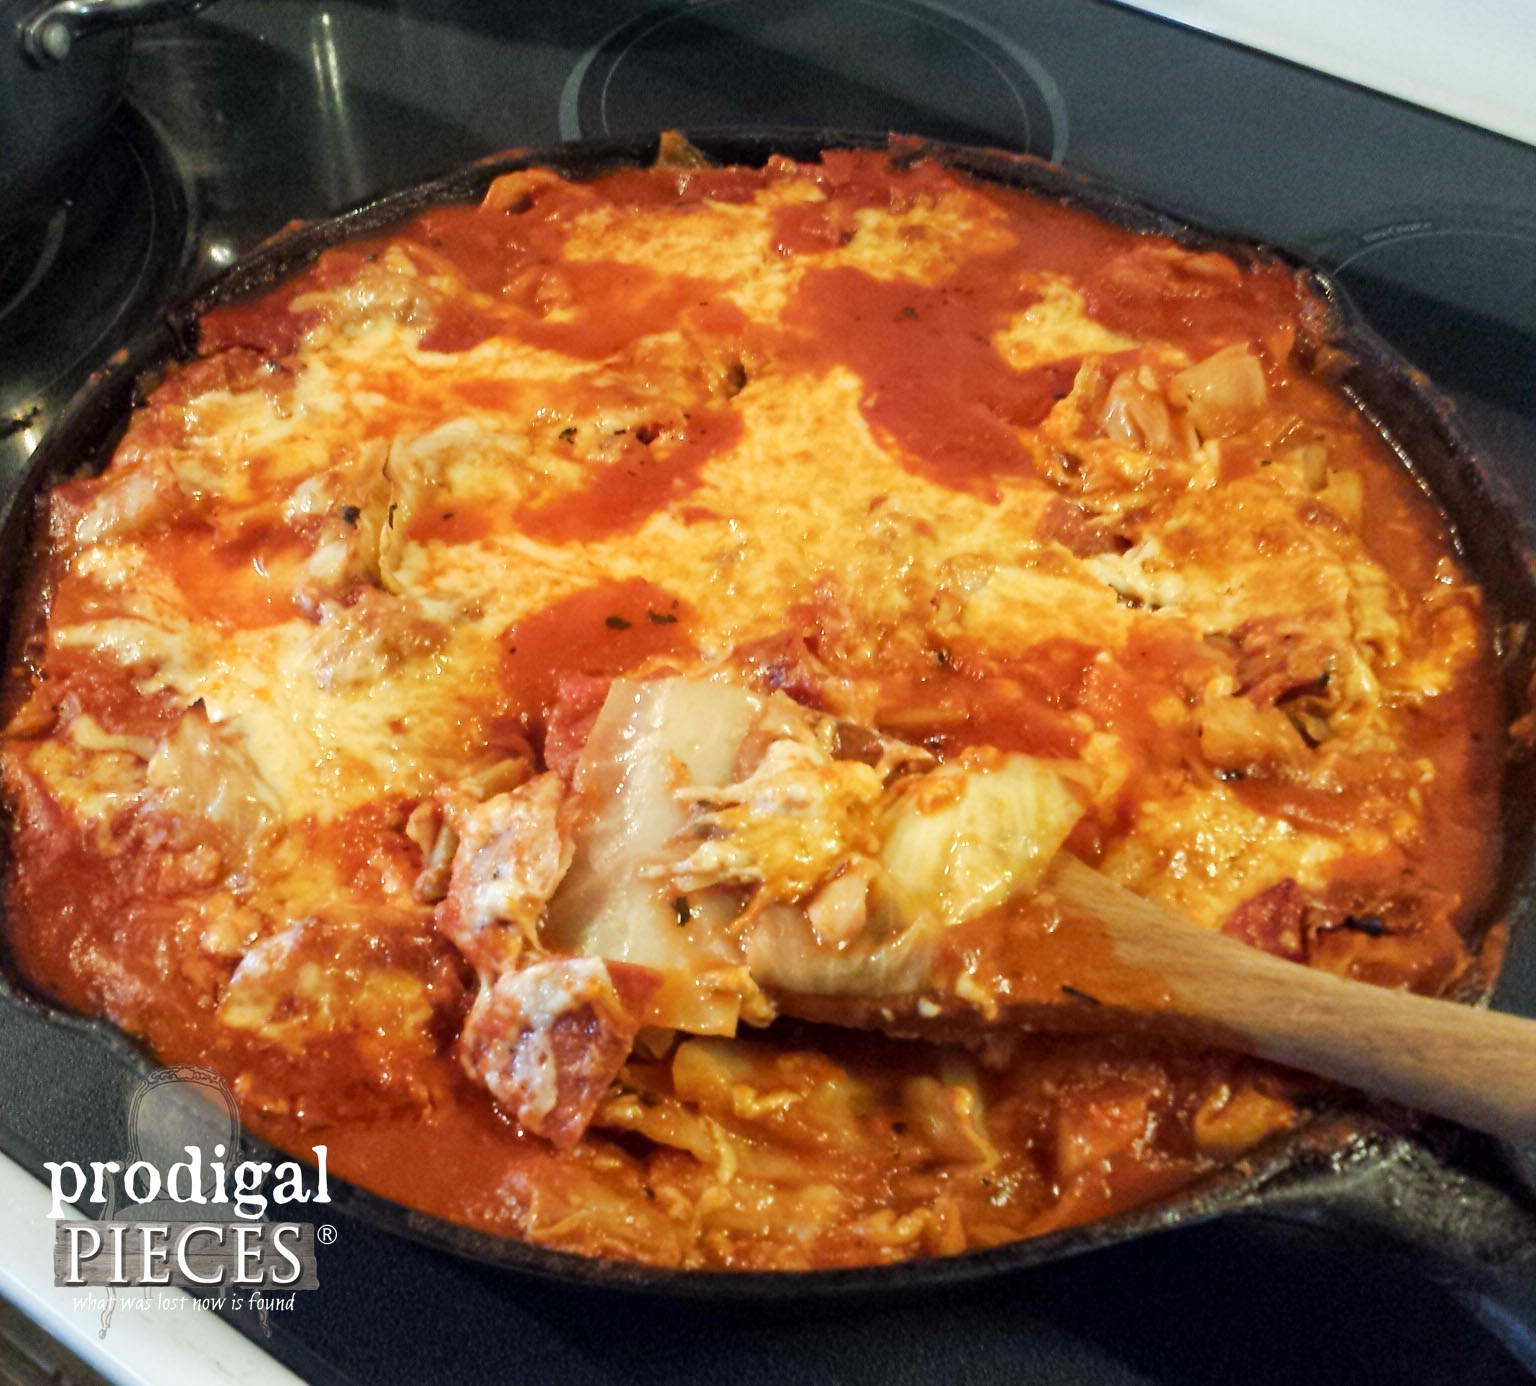 Skillet of Cabbage Pizza (aka Cabbage Lasagna) by Prodigal Pieces | www.prodigalpieces.com